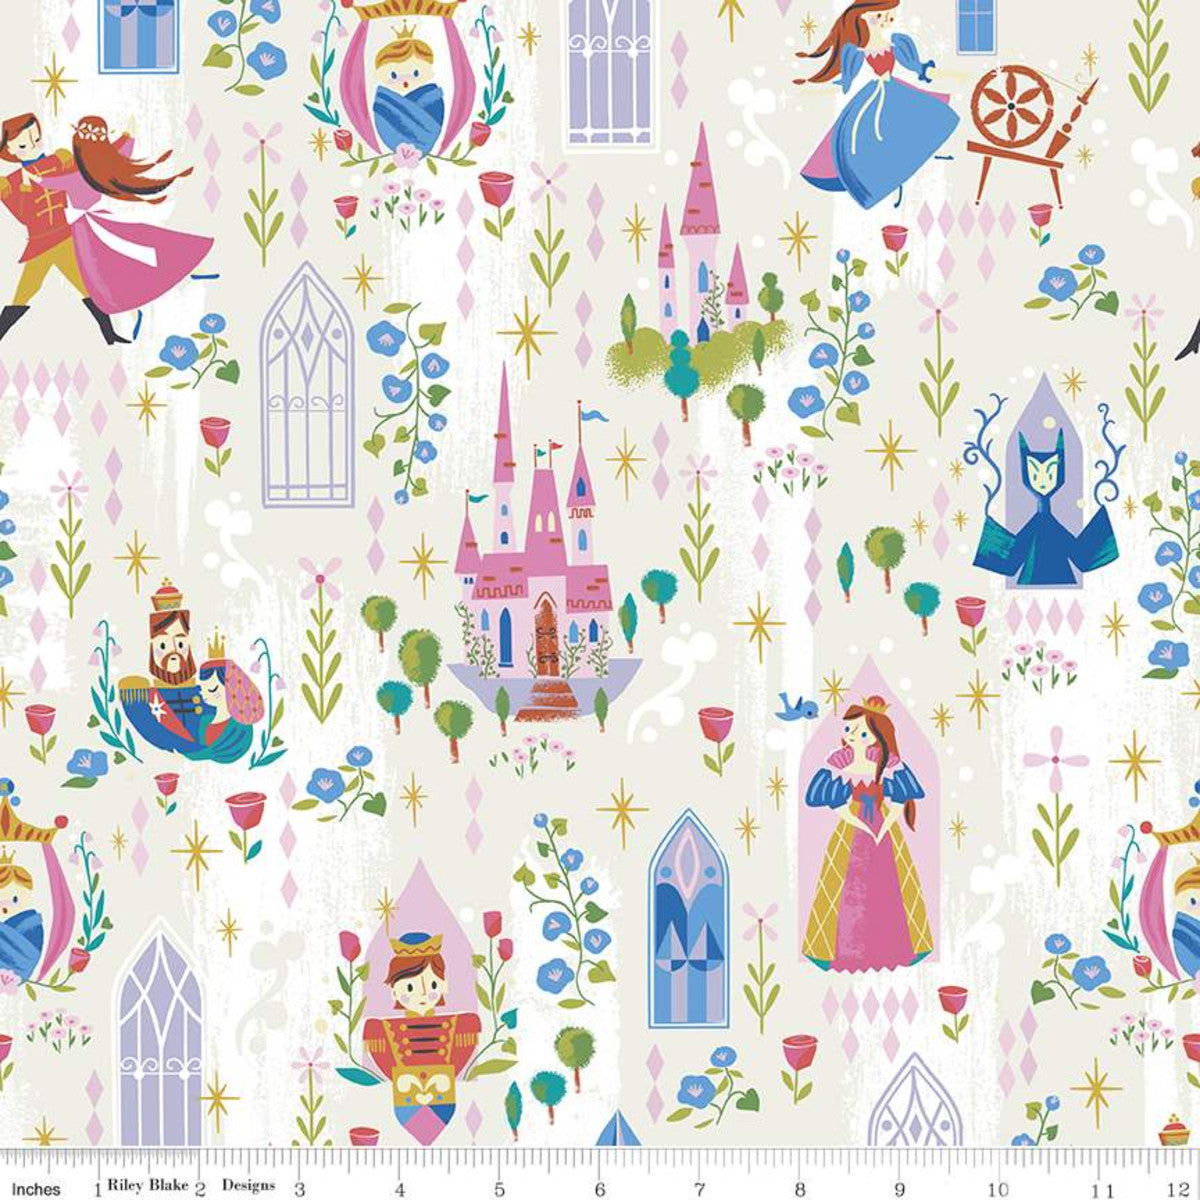 Manufacturer: Riley Blake Designs Designer: Jill Howarth Collection: Little Brier Rose Print Name: Main in Parchment Sparkle Material: 100% Cotton  Weight: Quilting  SKU: SC11070-PARCHMENT Width: 44 inches